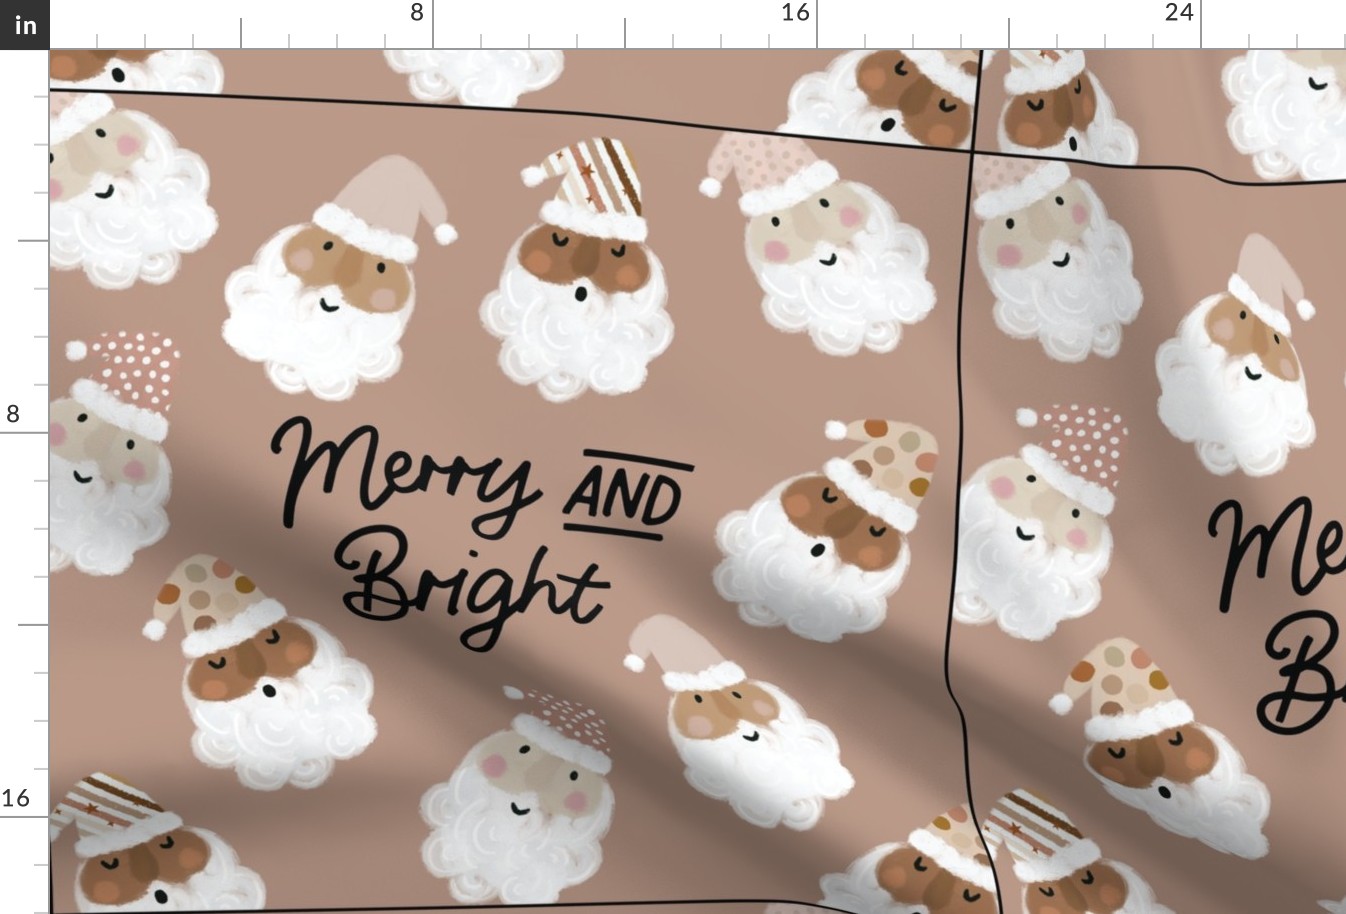 6 loveys: merry and bright on christmas flax